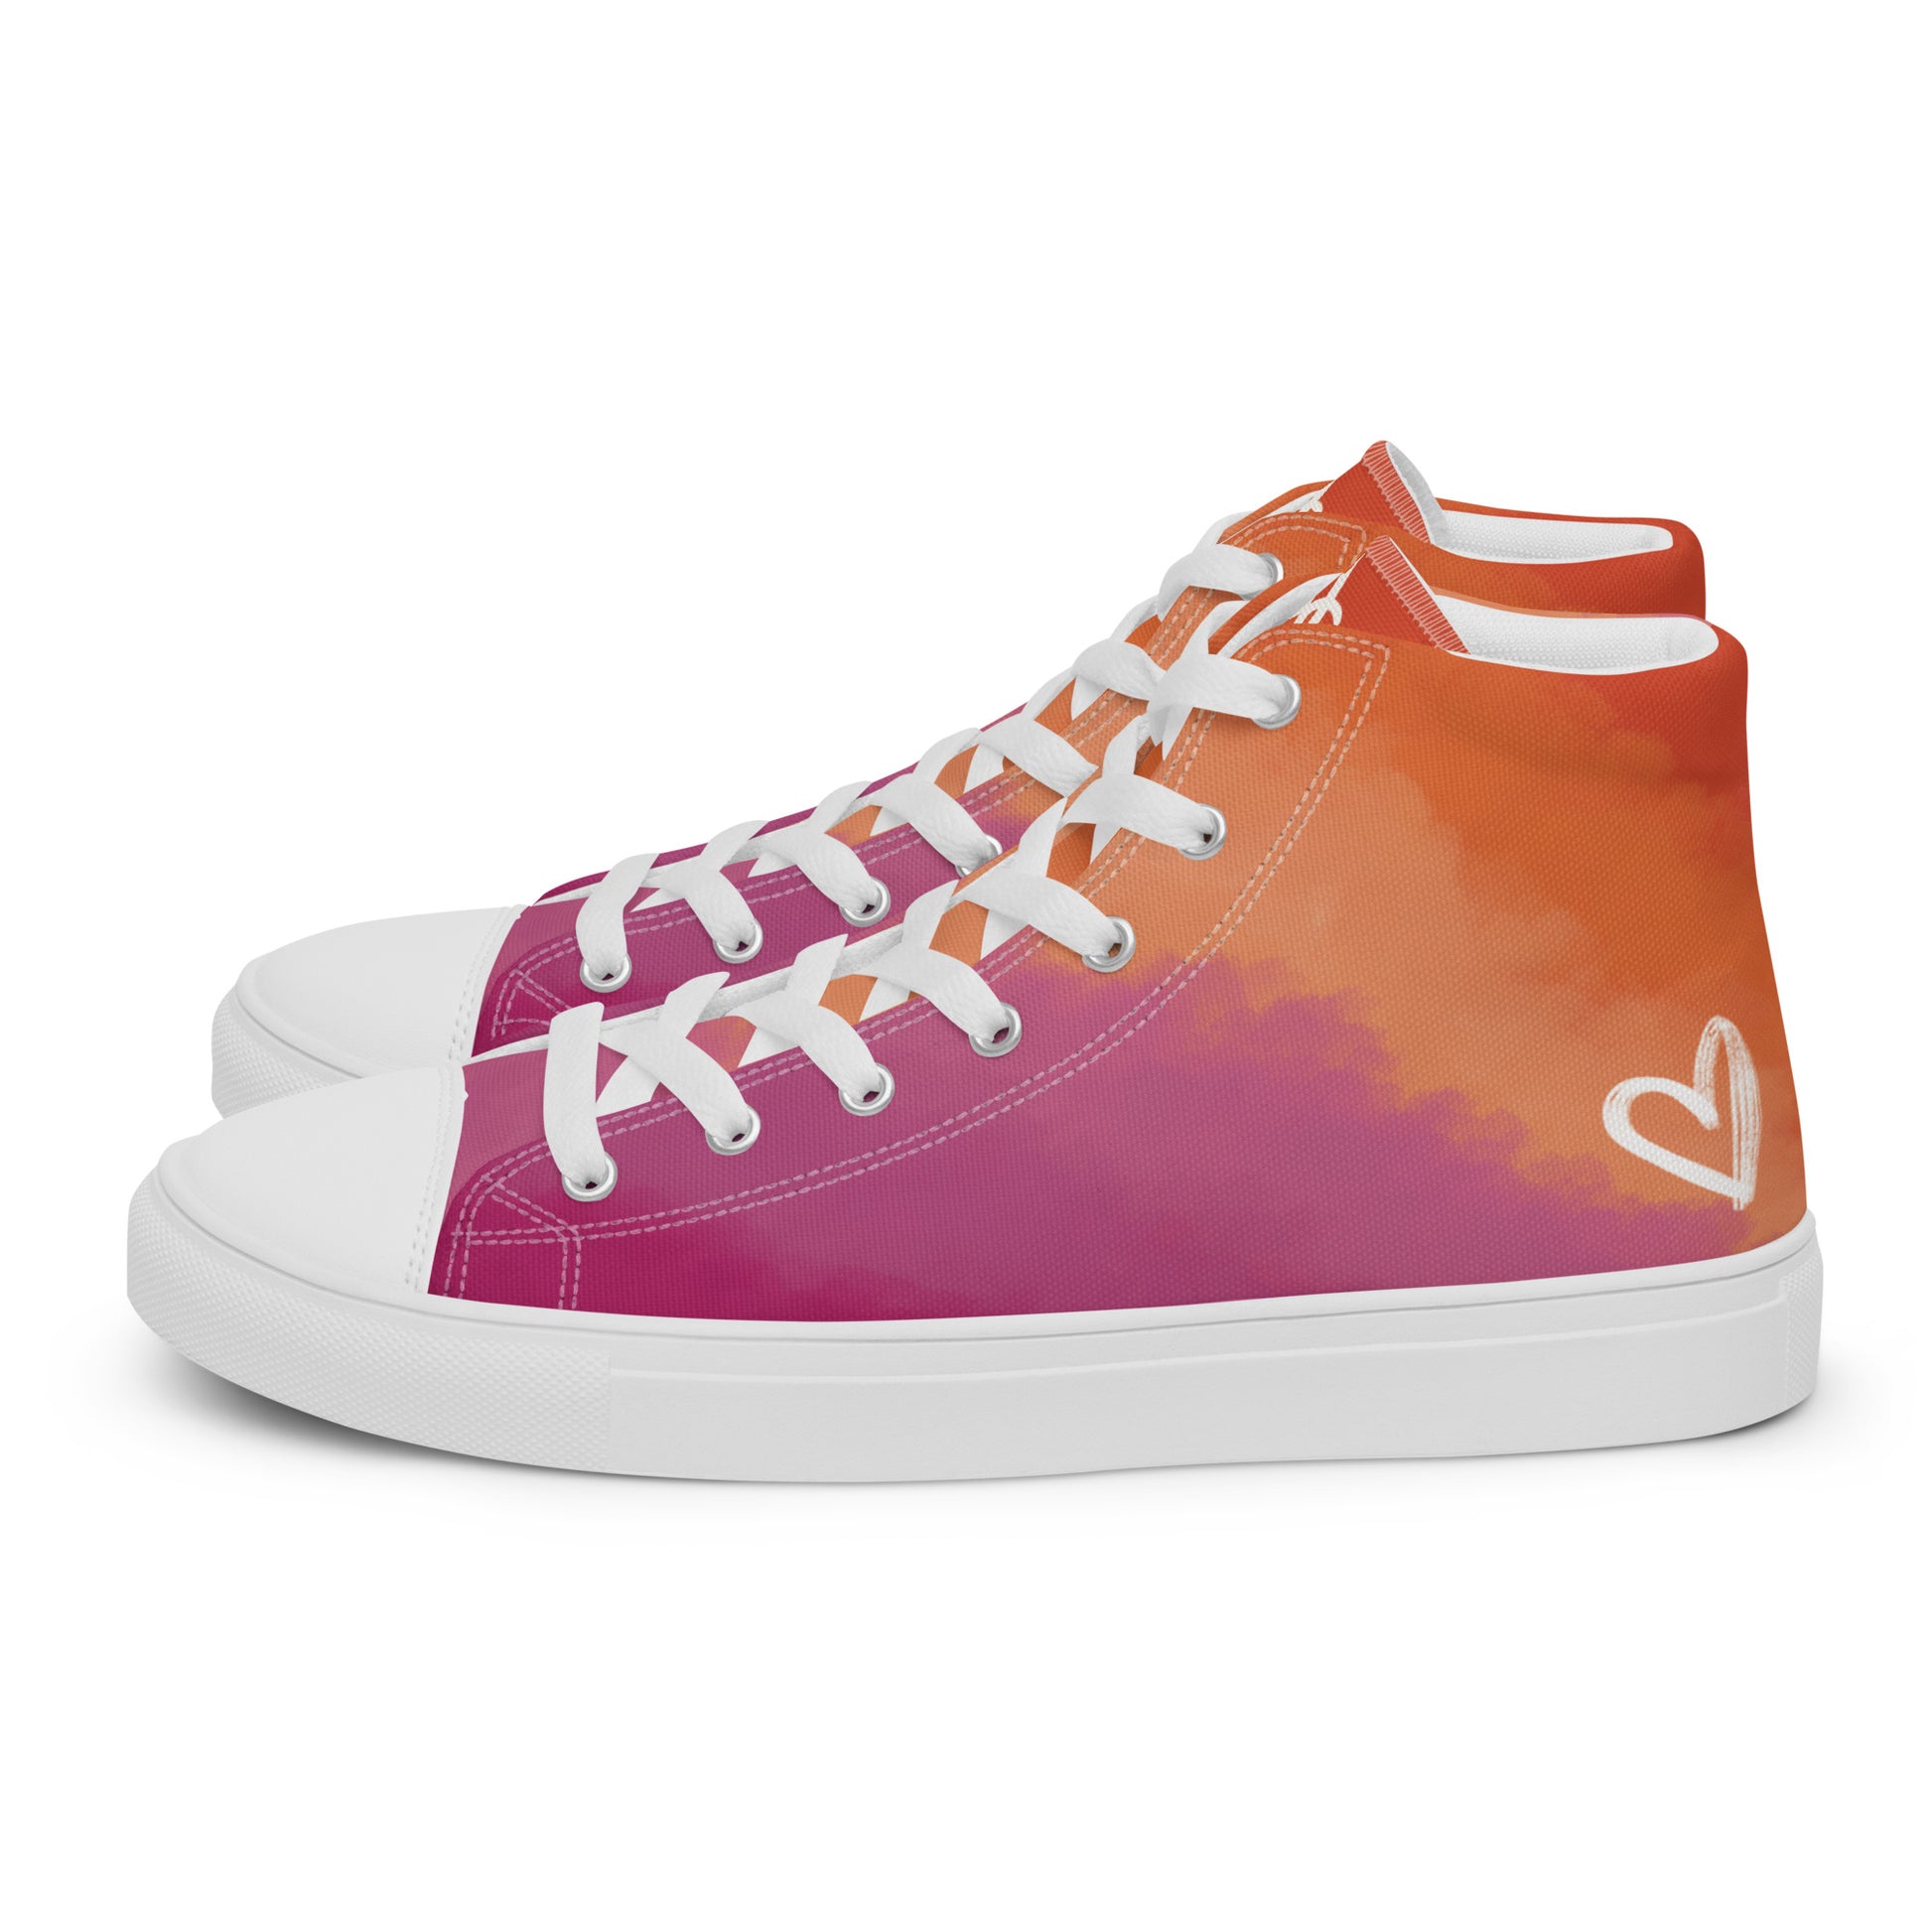 Left view: A pair of high top shoes with cloud layers in the lesbian flag colors, a white heart on the heel, and the Aras Sivad Studio logo on the tongue.